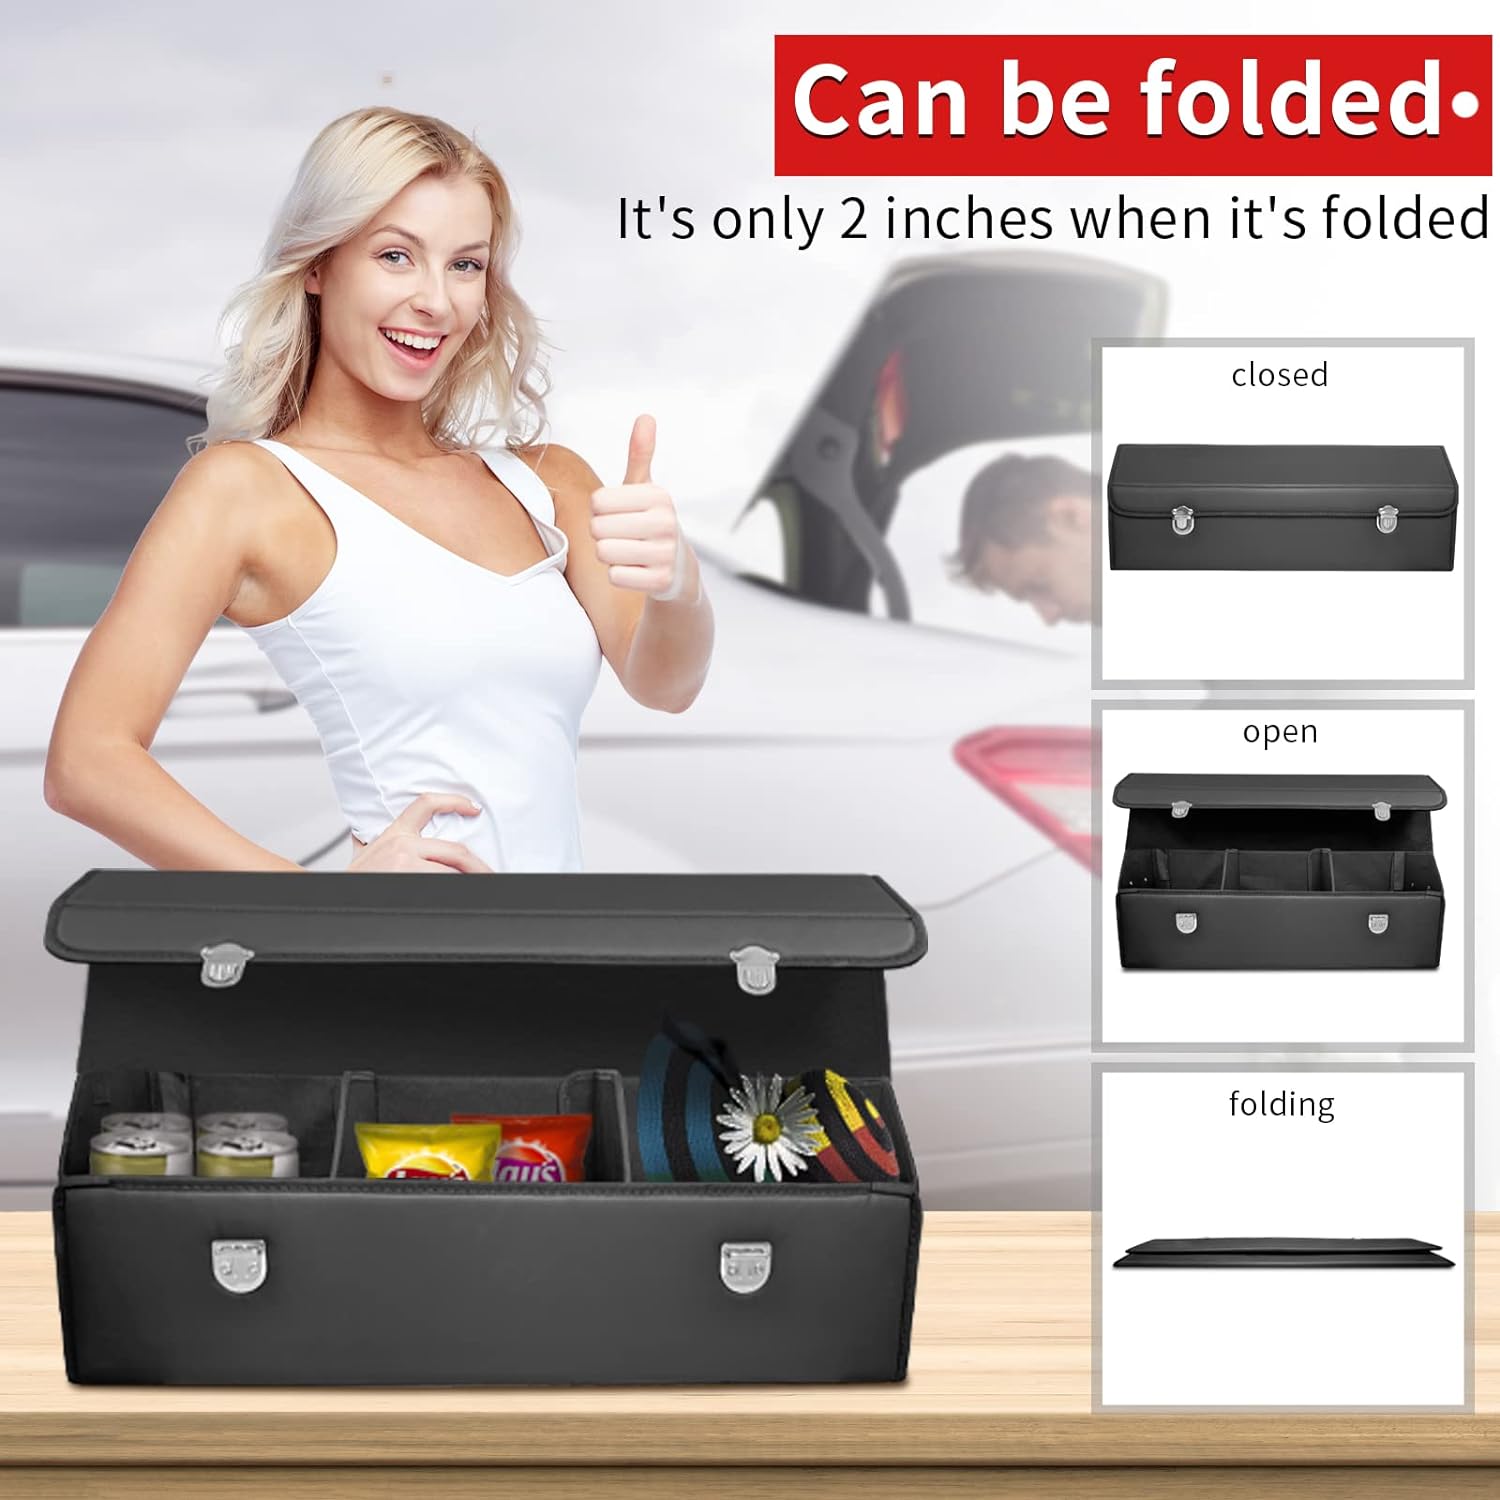 Blushbees Car Storage Organizer - Spacious, Durable, and Foldable